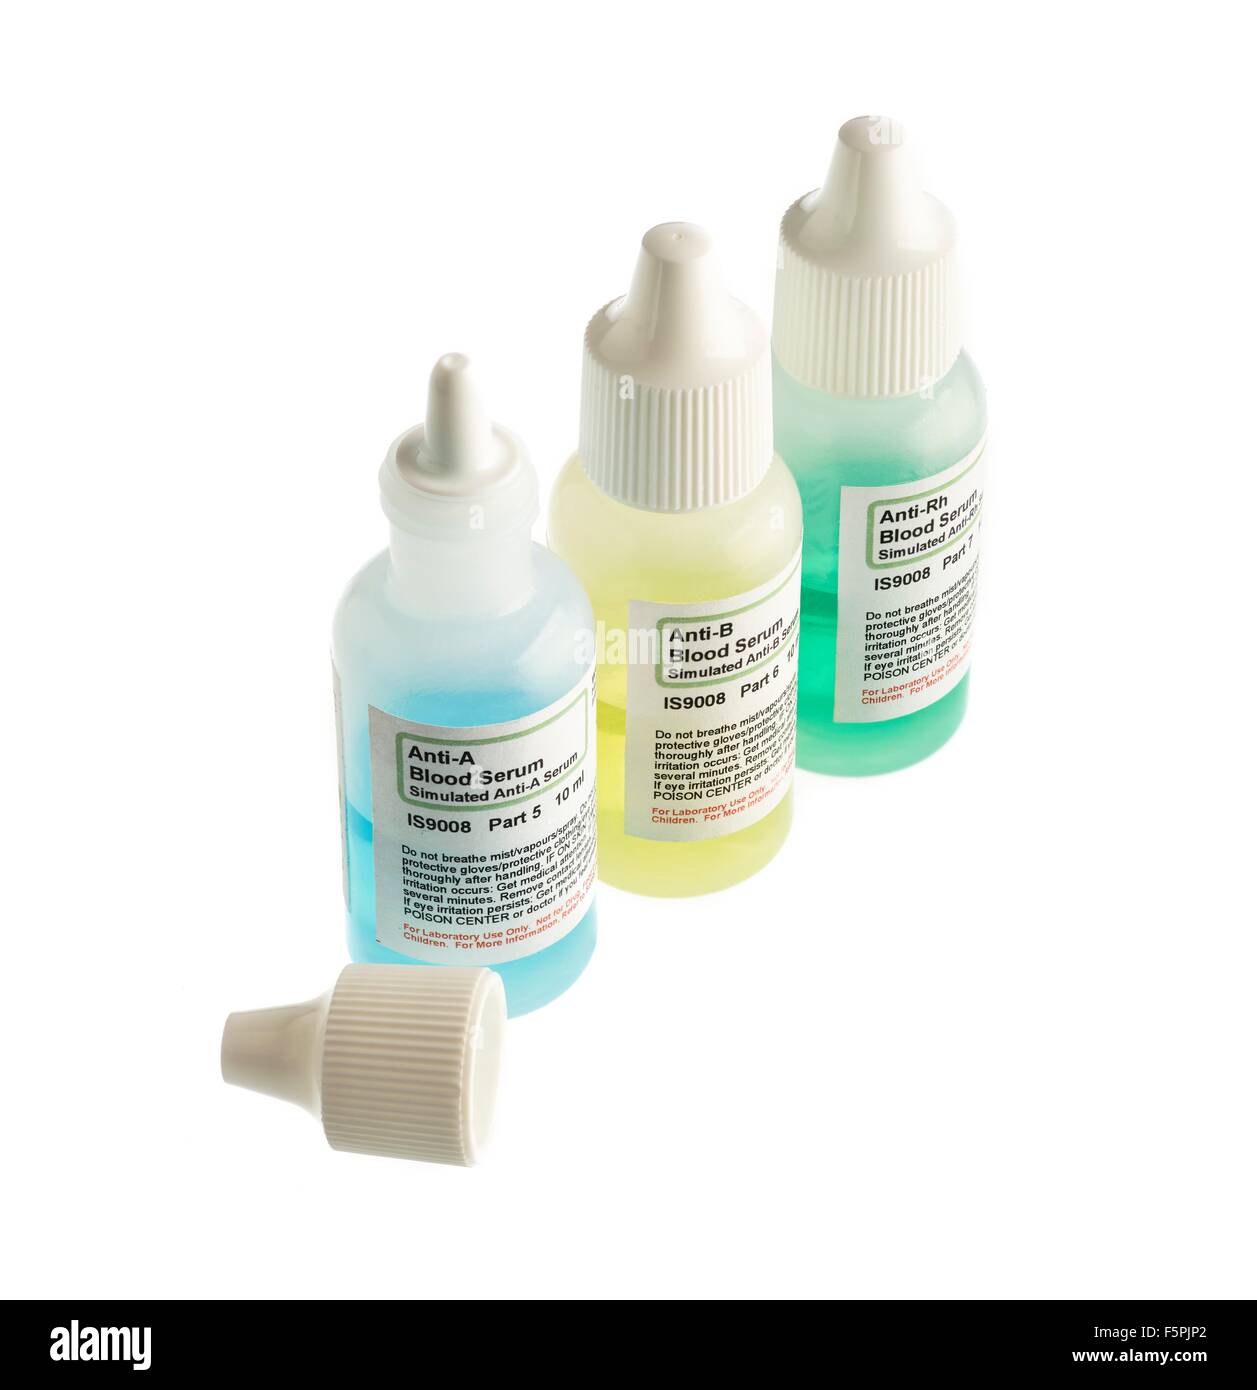 Blood serum samples in plastic bottles against a white background. Stock Photo